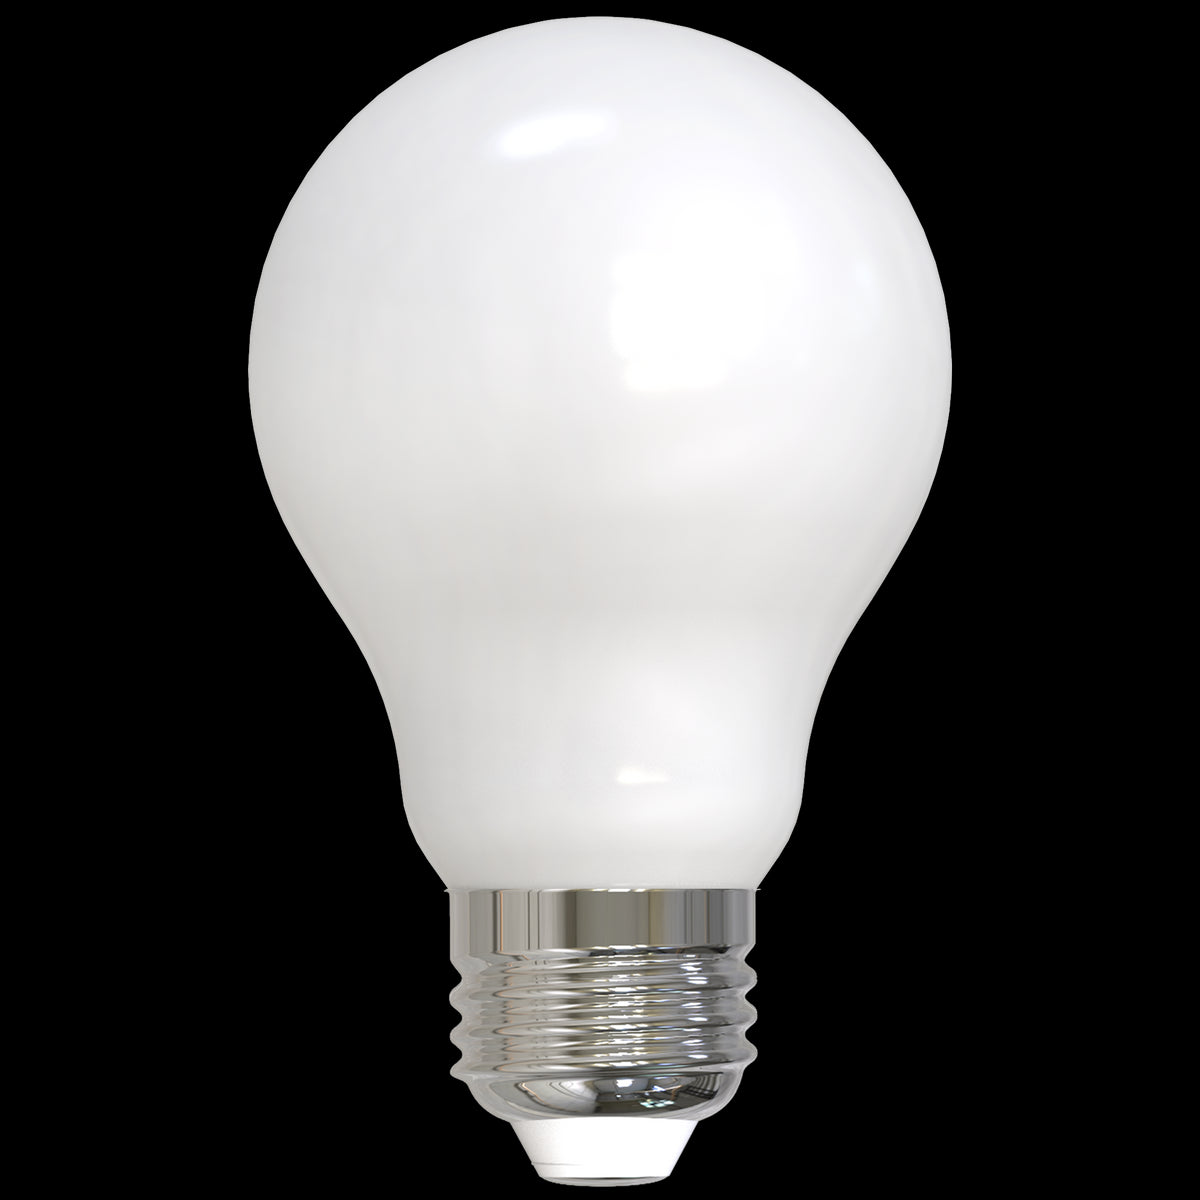 15W 120V A19 E26 2700K Frosted LED Bulb by Bulbrite at